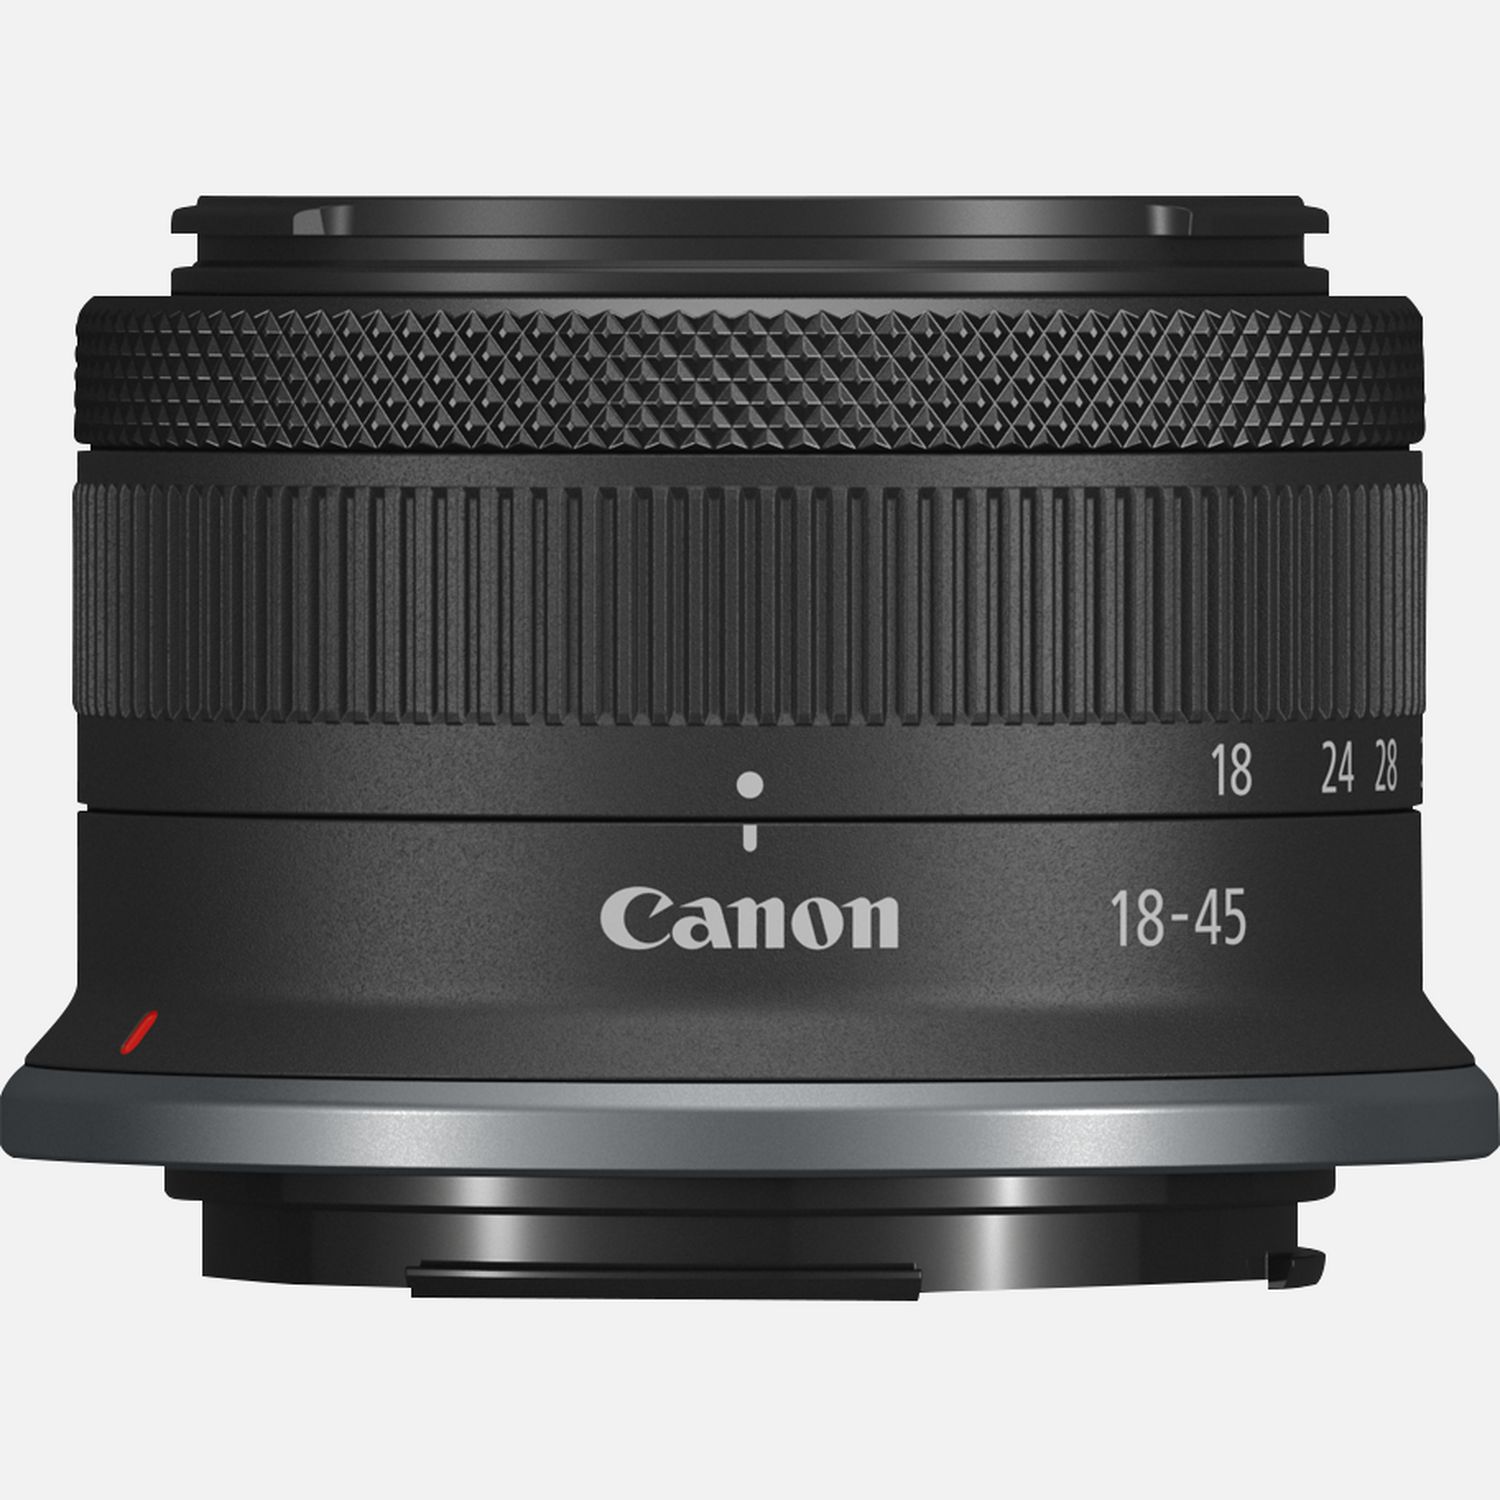 Canon Eos R8 + RF 24-50mm F/4.5-6.3 IS STM (Promo regalo)